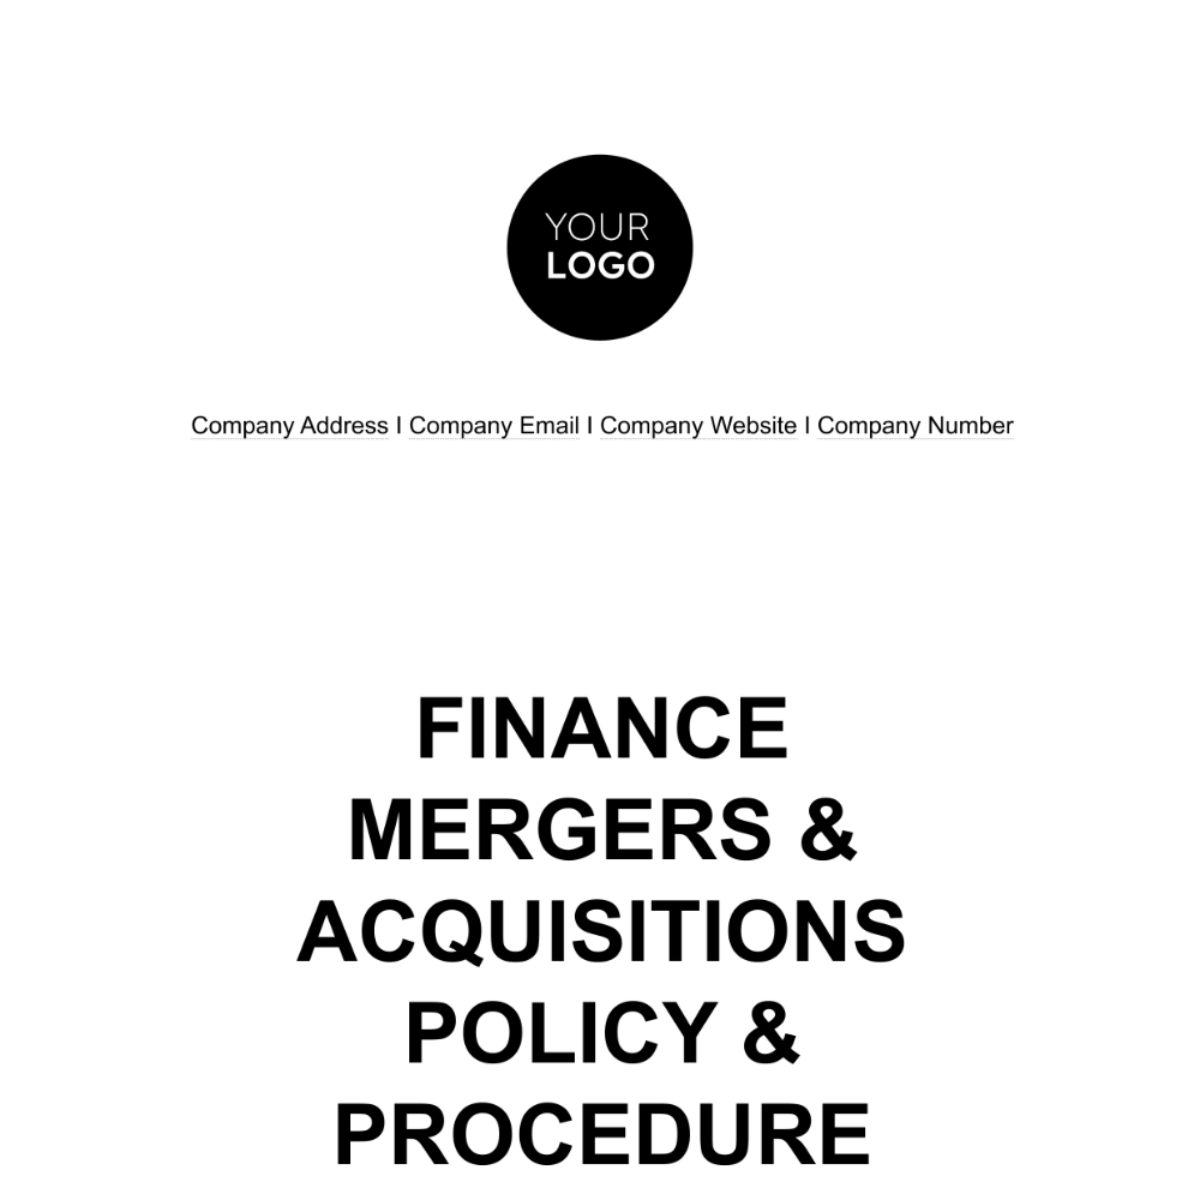 Free Finance Mergers & Acquisitions Policy & Procedure Manual Template